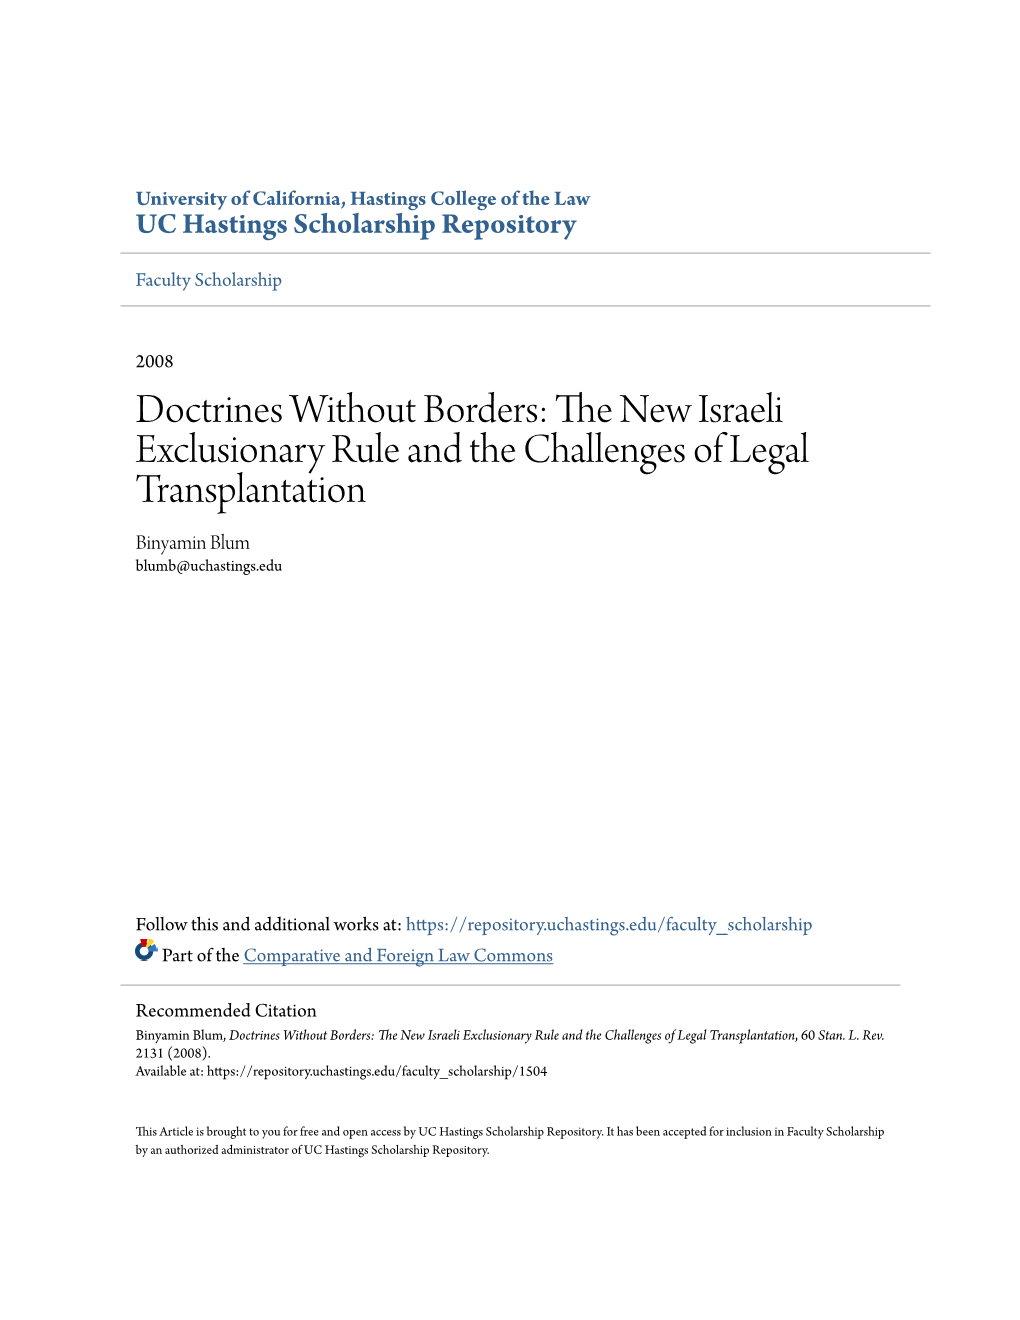 The New Israeli Exclusionary Rule and the Challenges of Legal Transplantation, 60 Stan